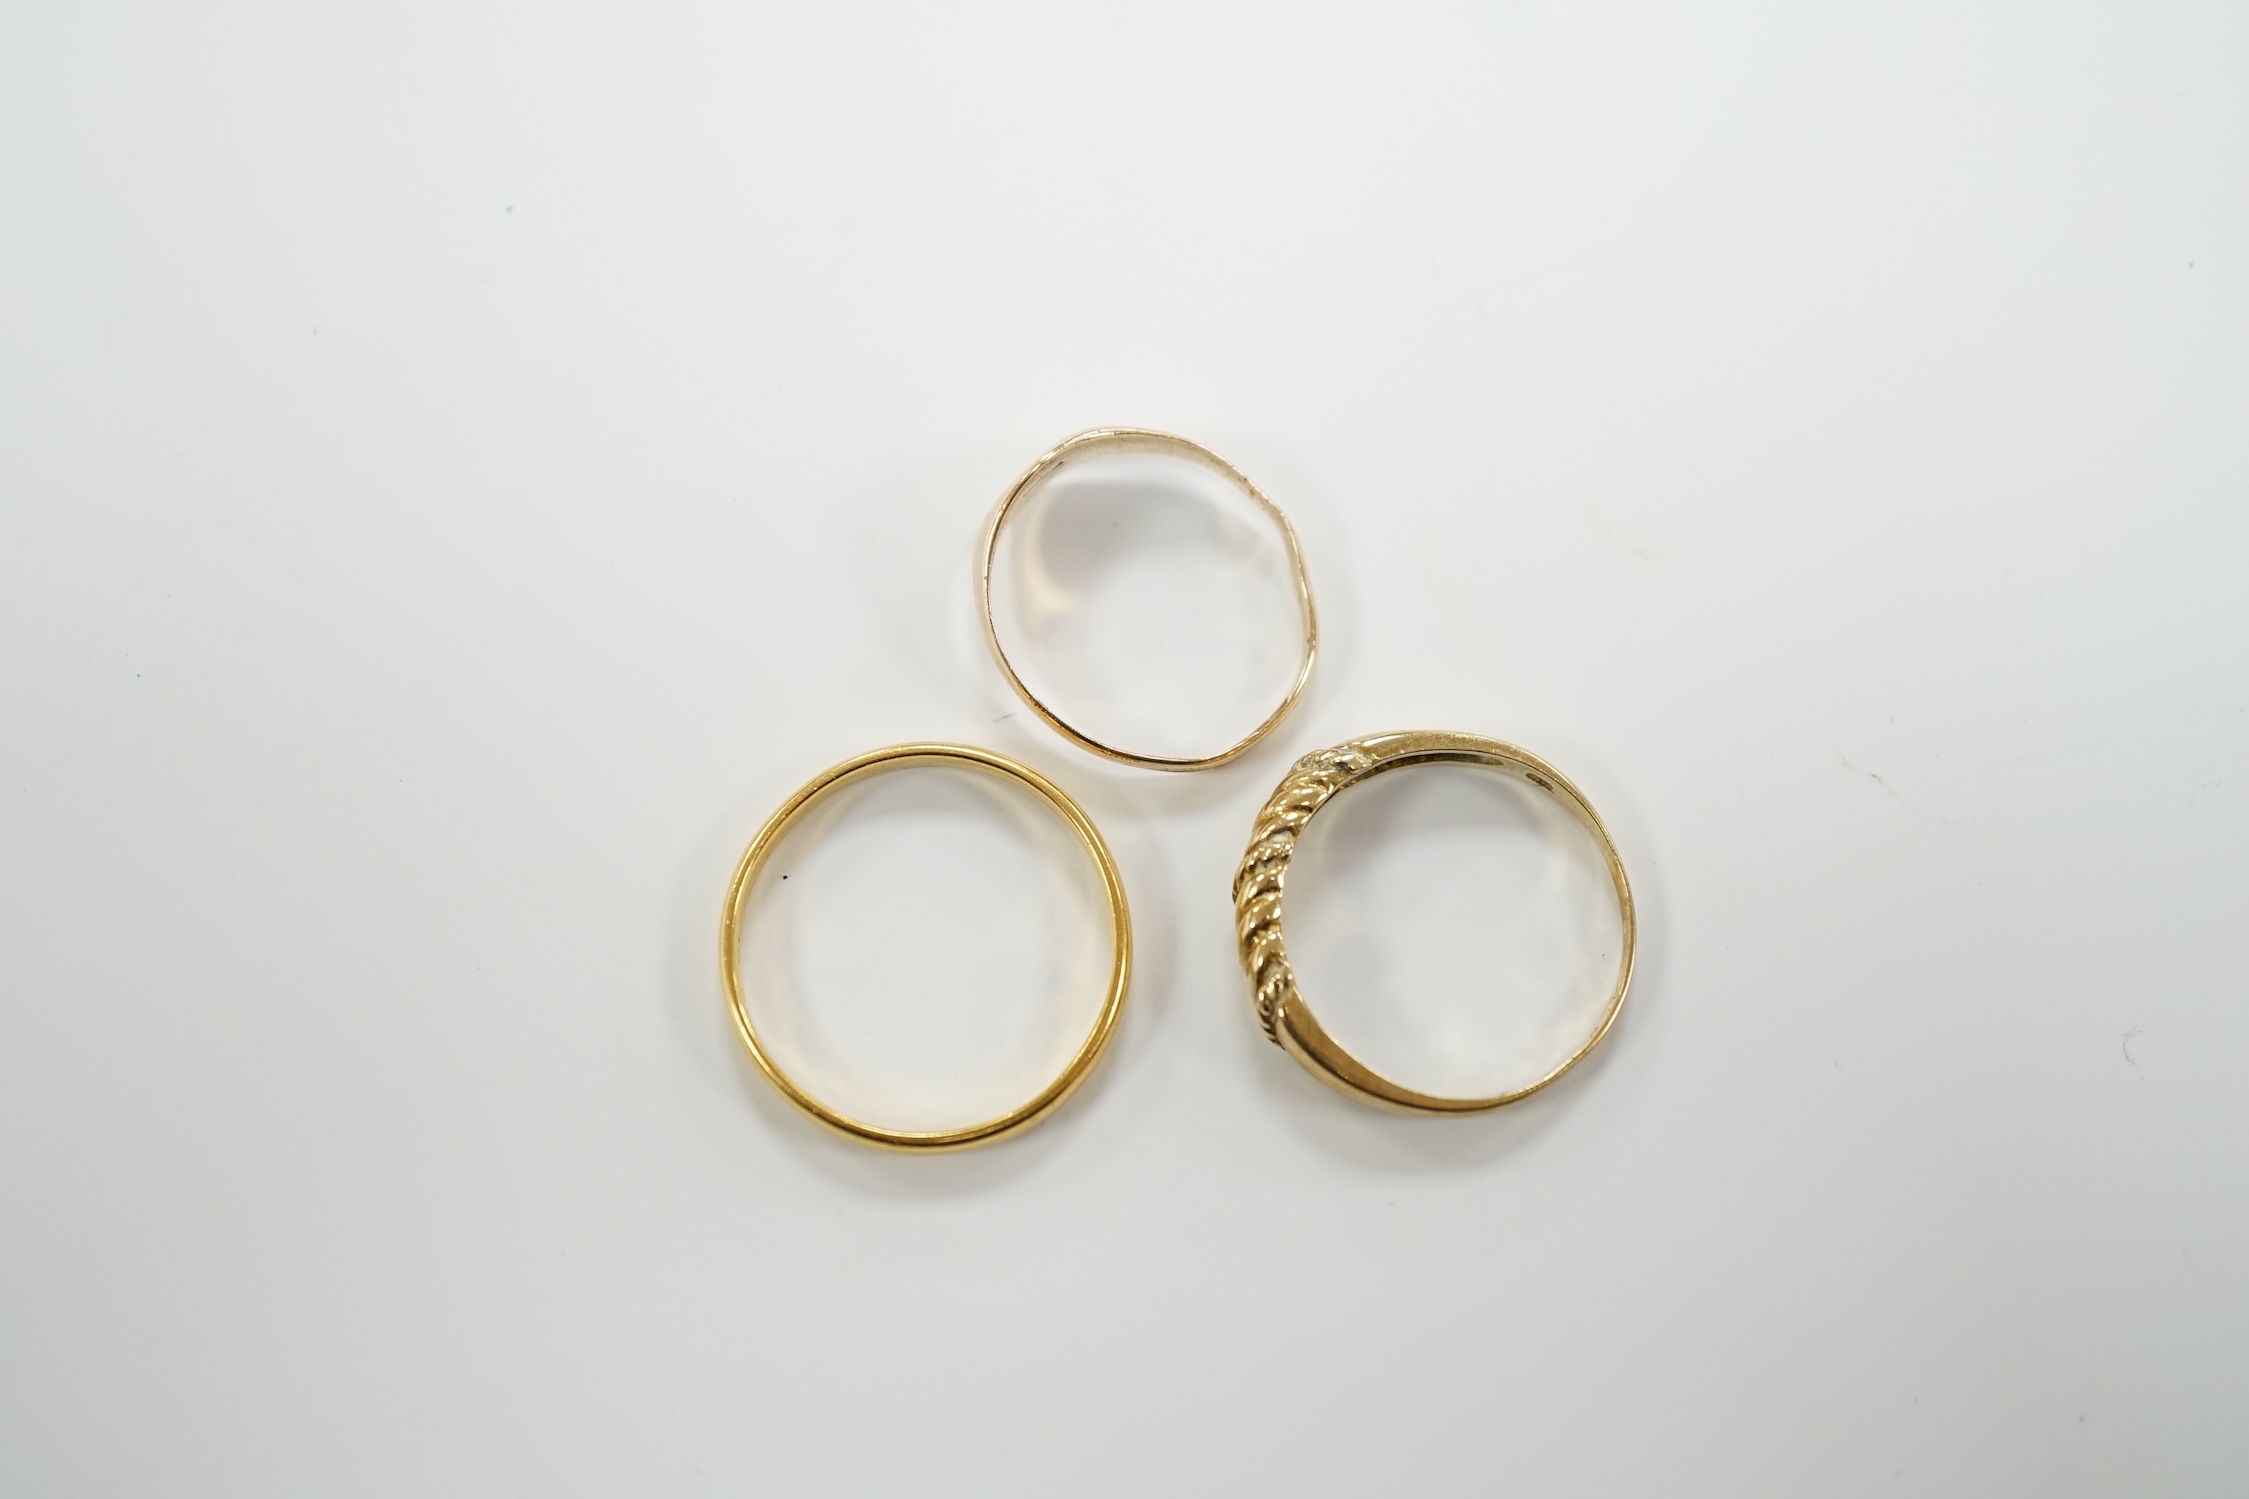 A 22ct gold wedding band, 3.4 grams, a 9ct gold signet ring, 16 grams and a yellow metal ring. - Image 4 of 4